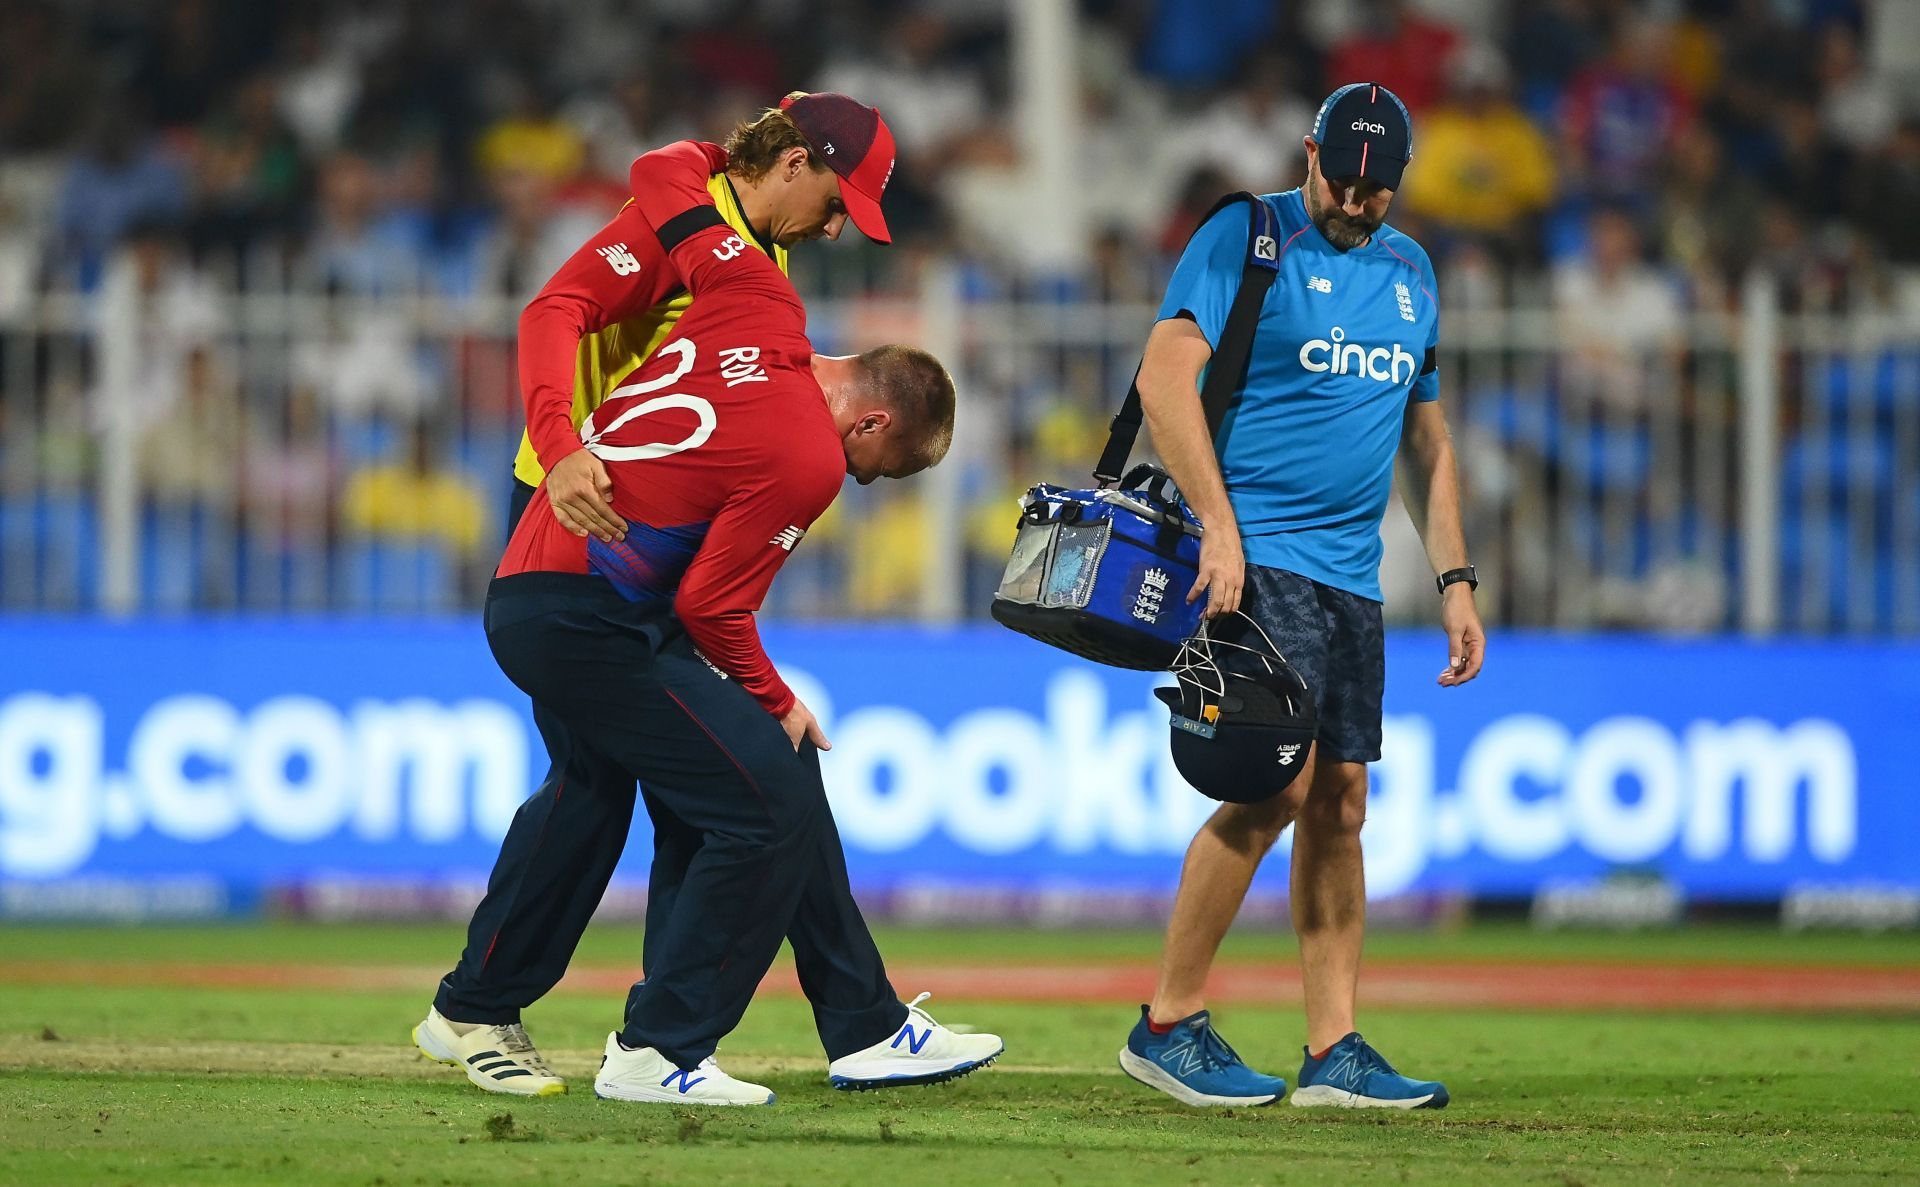 England will not have the services of Jason Roy for the rest of the tournament